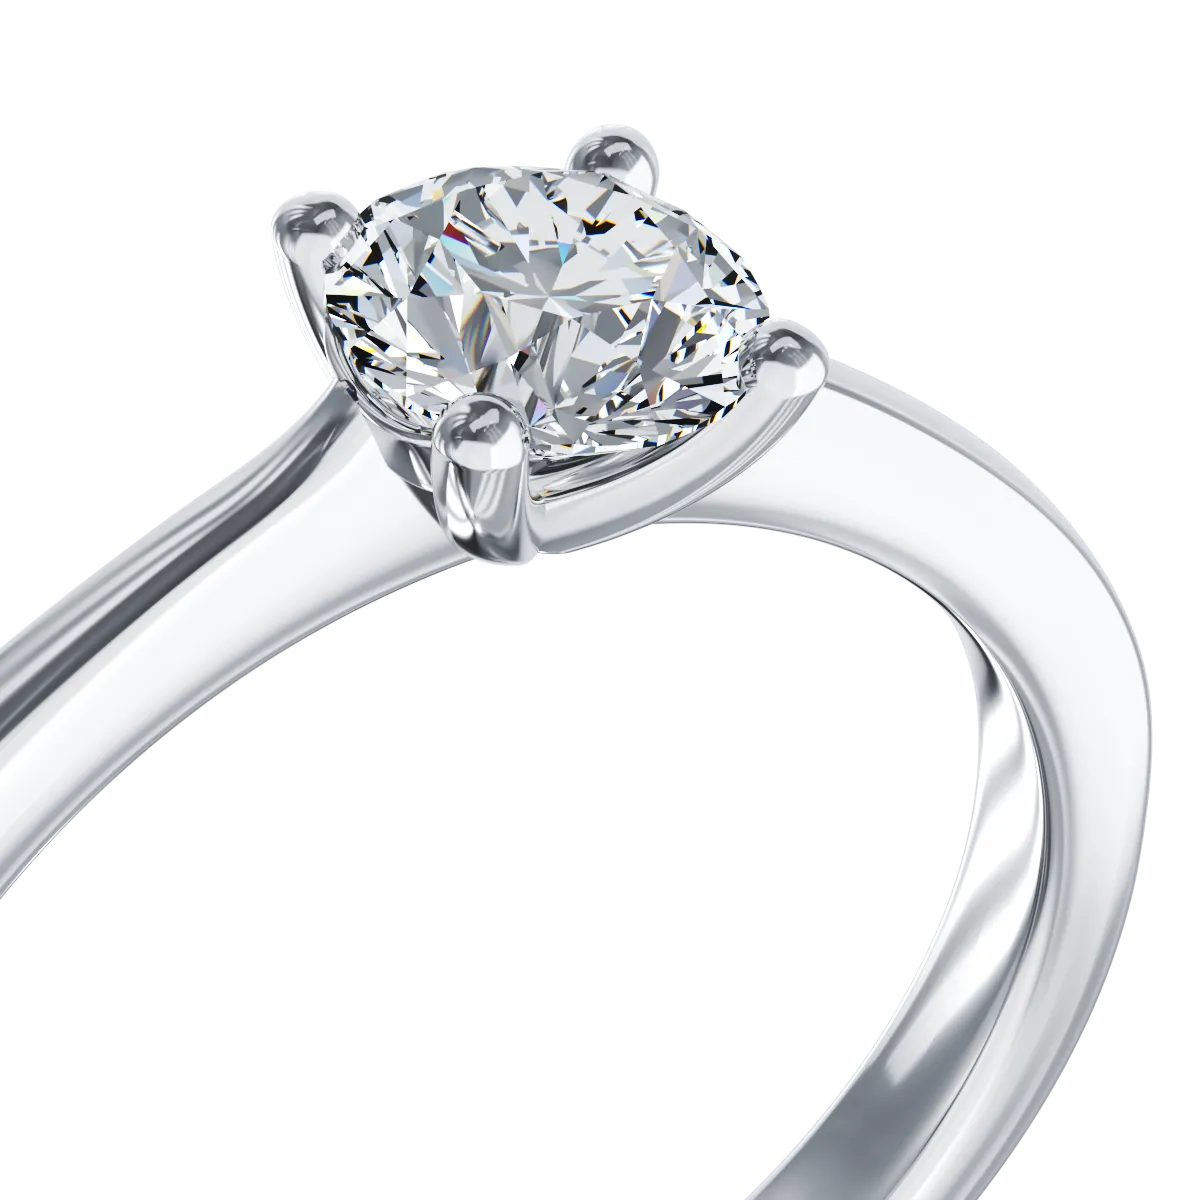 18K white gold engagement ring with 0.39ct diamond